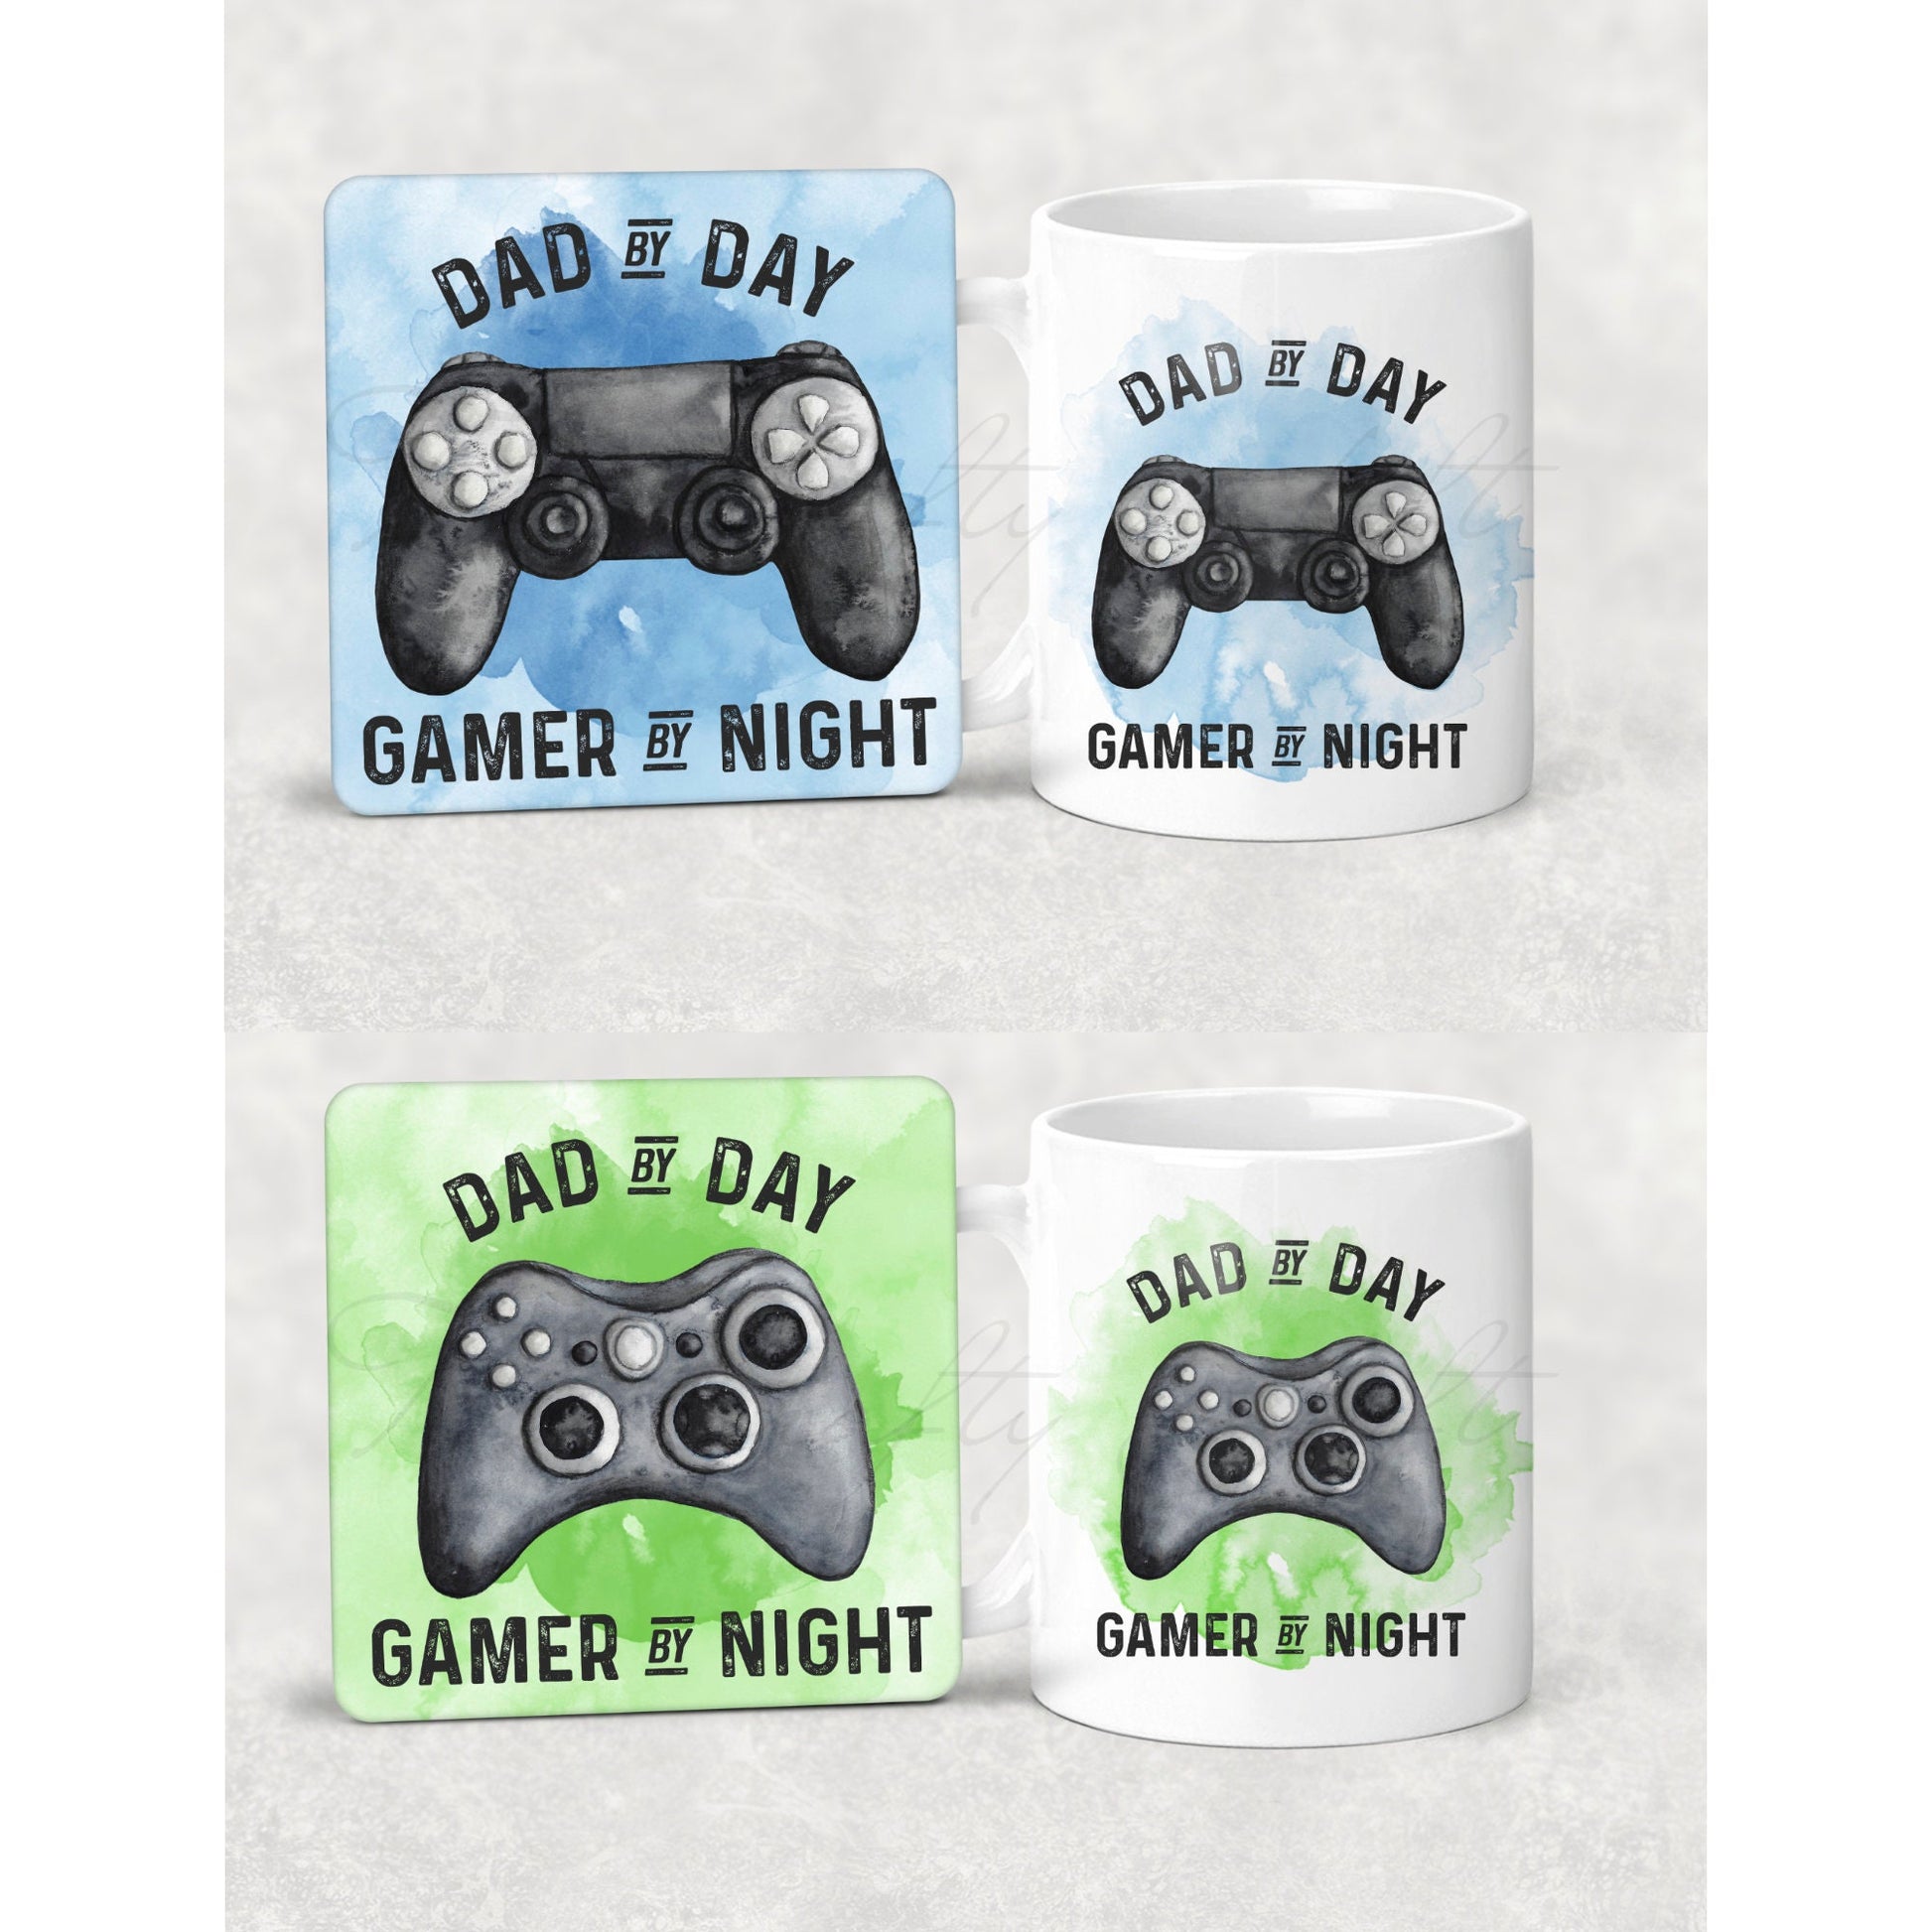 Mug and coaster set featuring a gaming design with text that reads 'dad by day, gamer by night' in green or blue